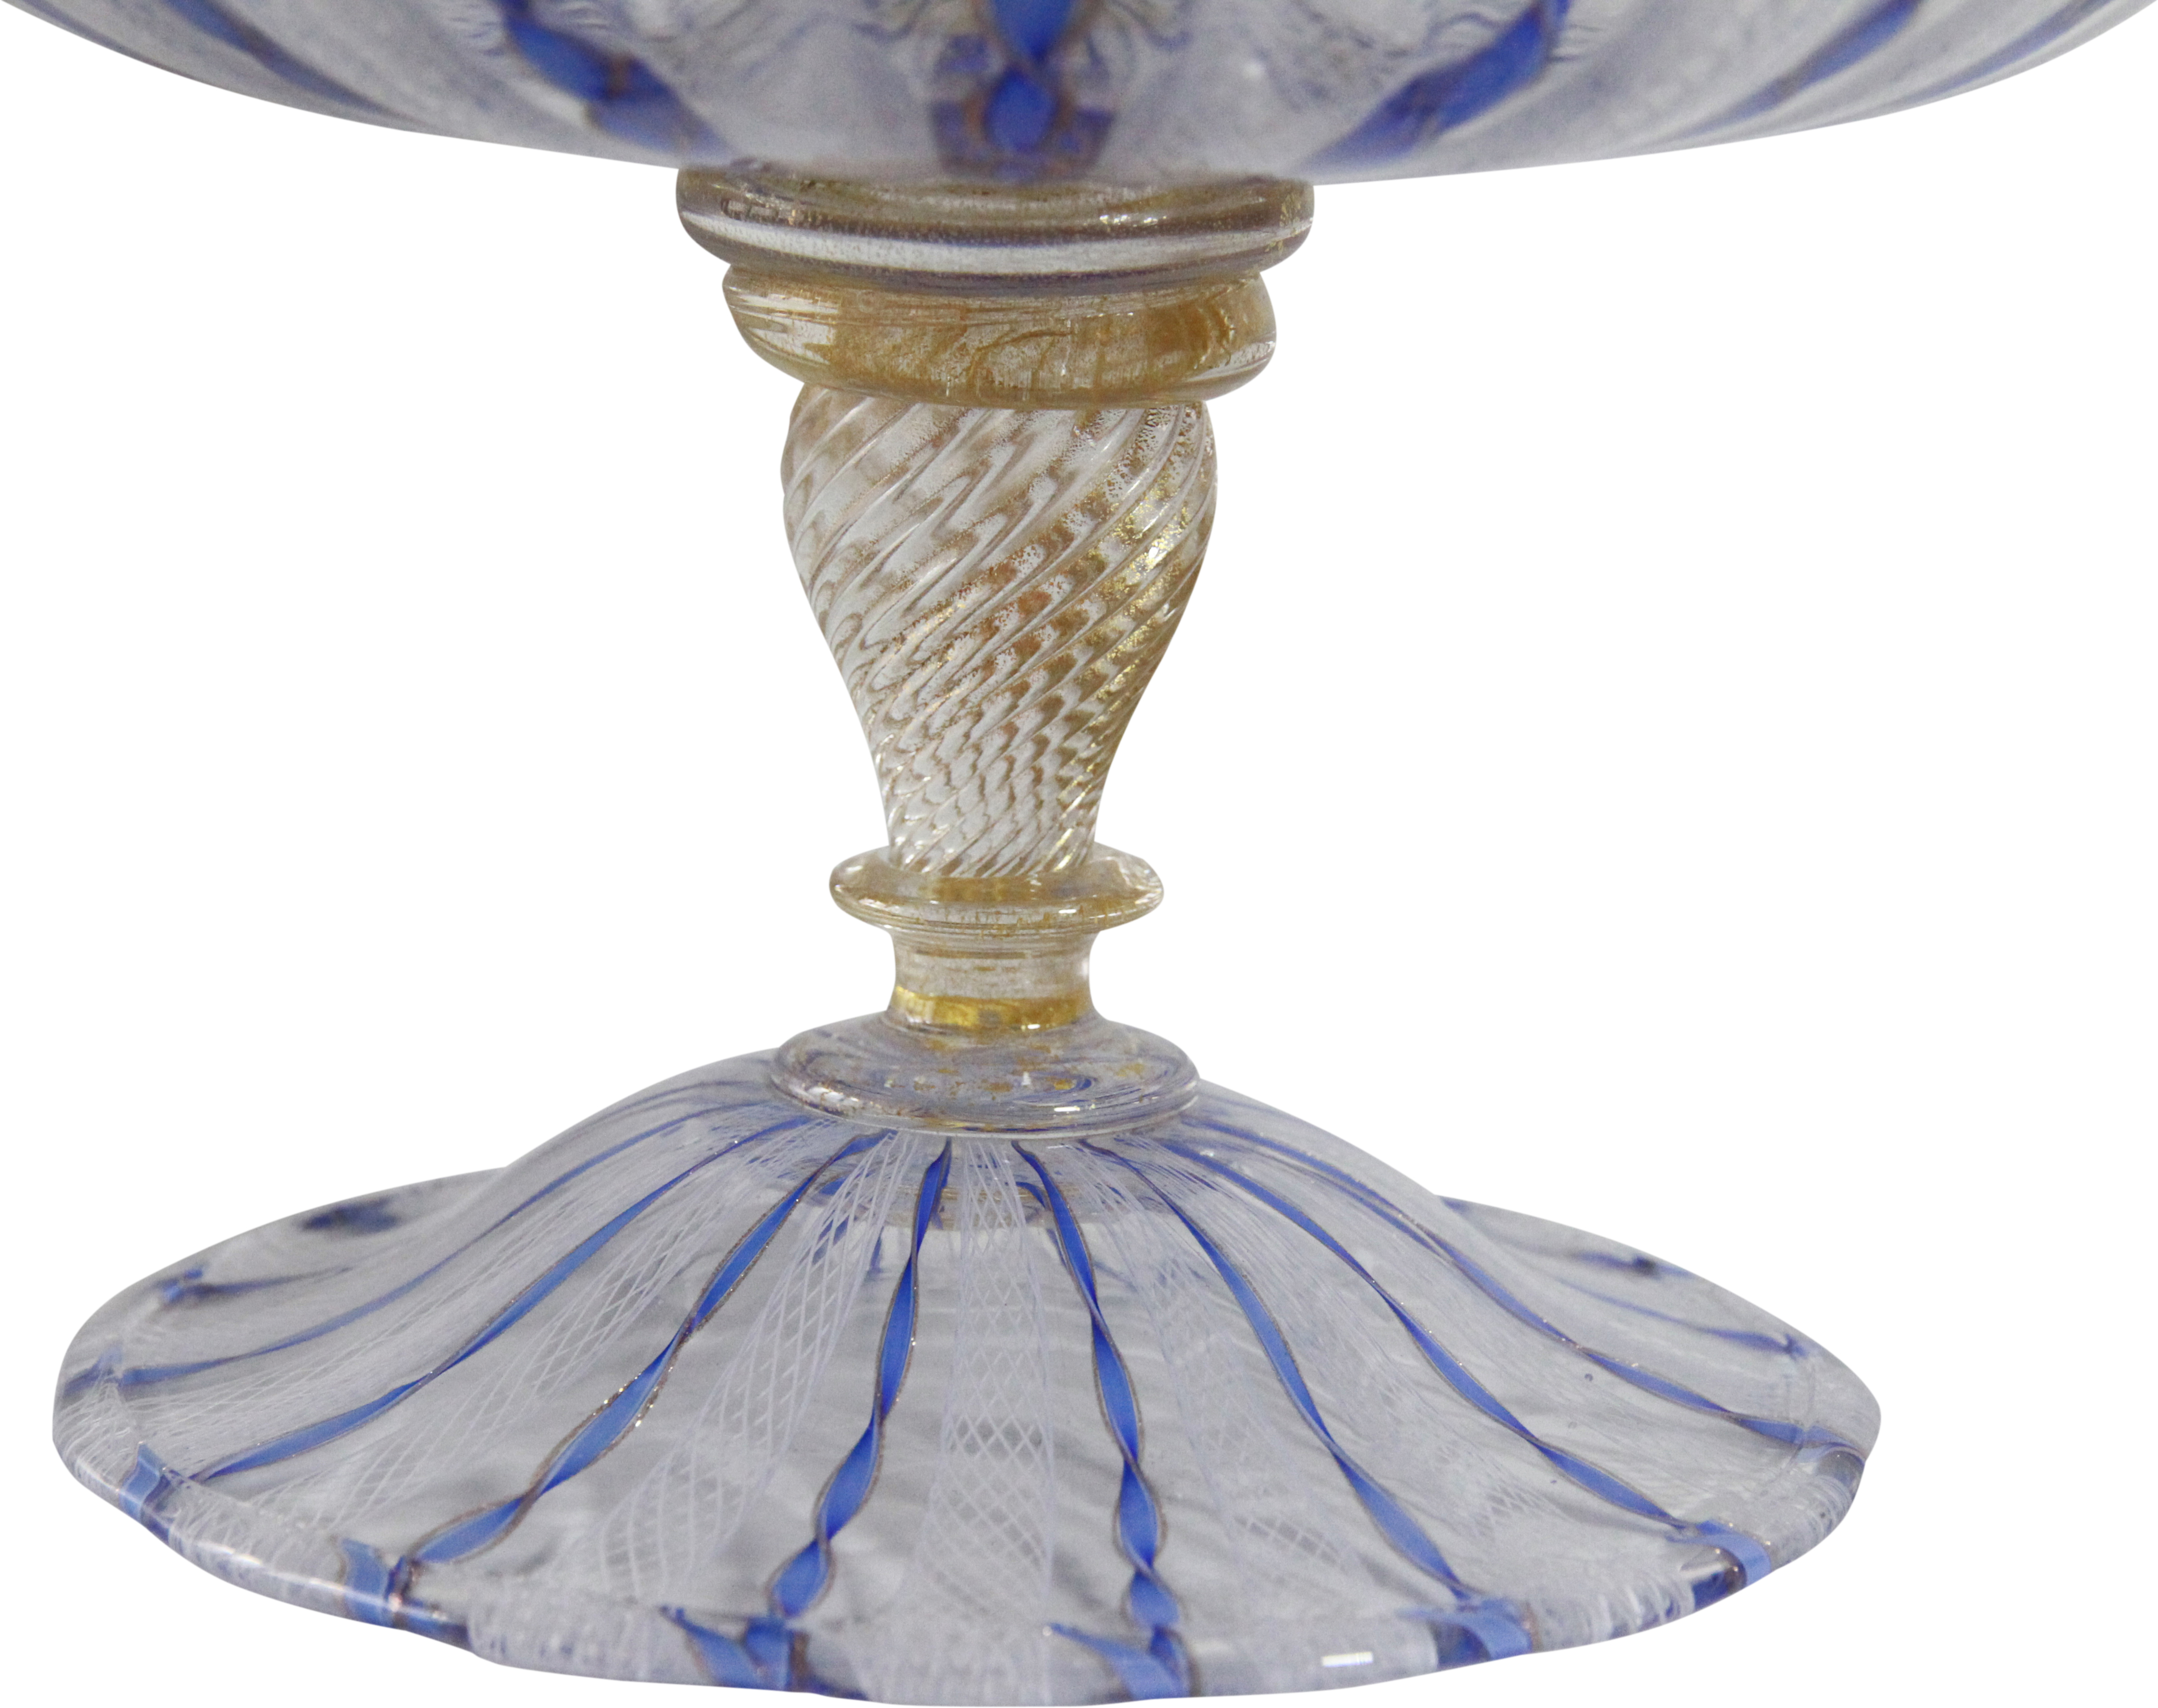 A Venetian suite of decorative desert, bowls & urns decorated in blue & gilt, 15 pieces total, - Image 7 of 12